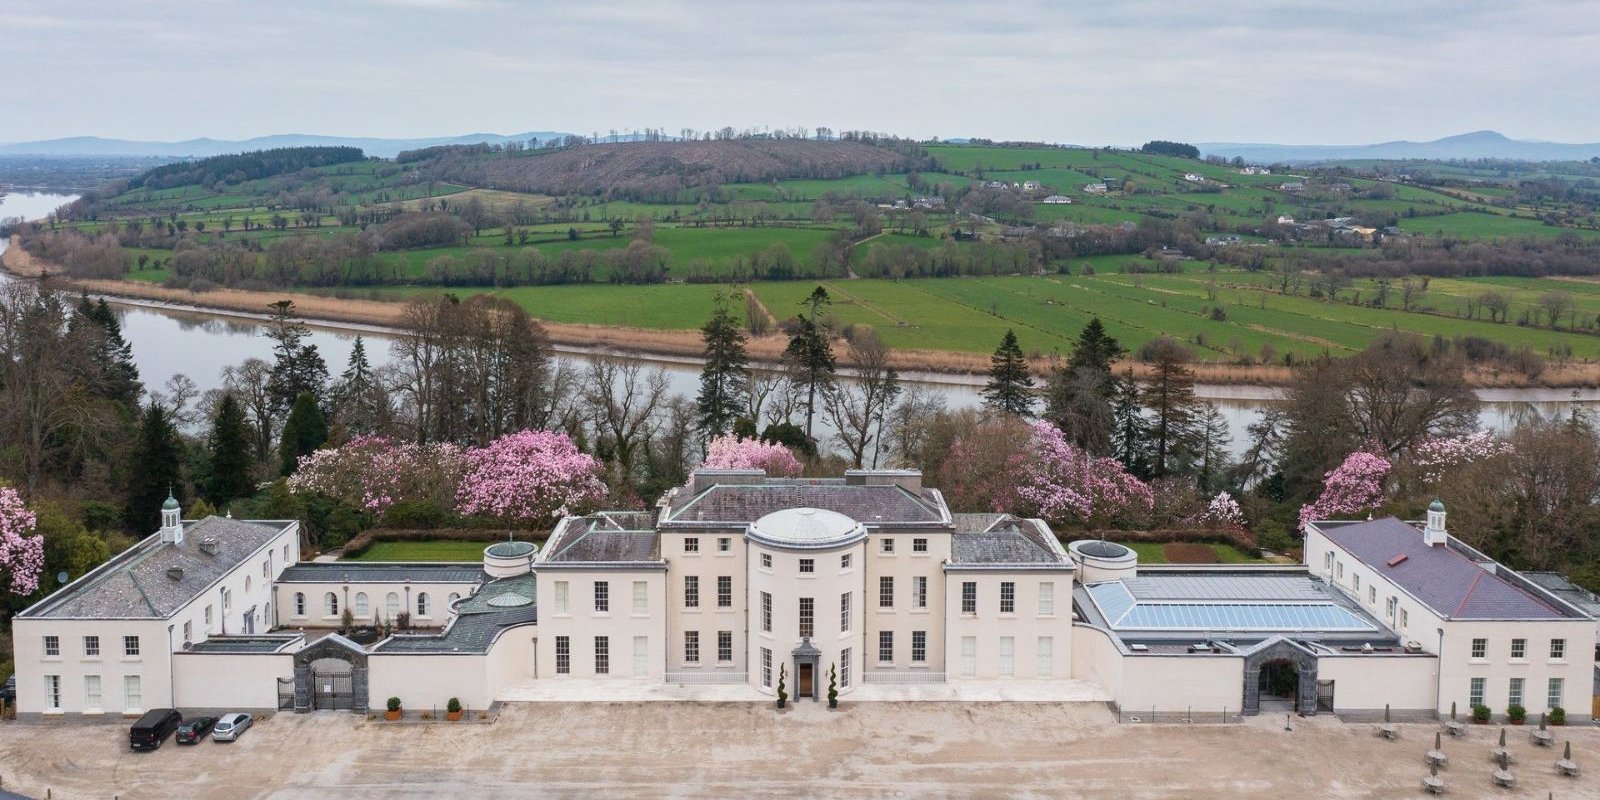 Mount congreve house  x  px www.towerhotelwaterford.com_v4